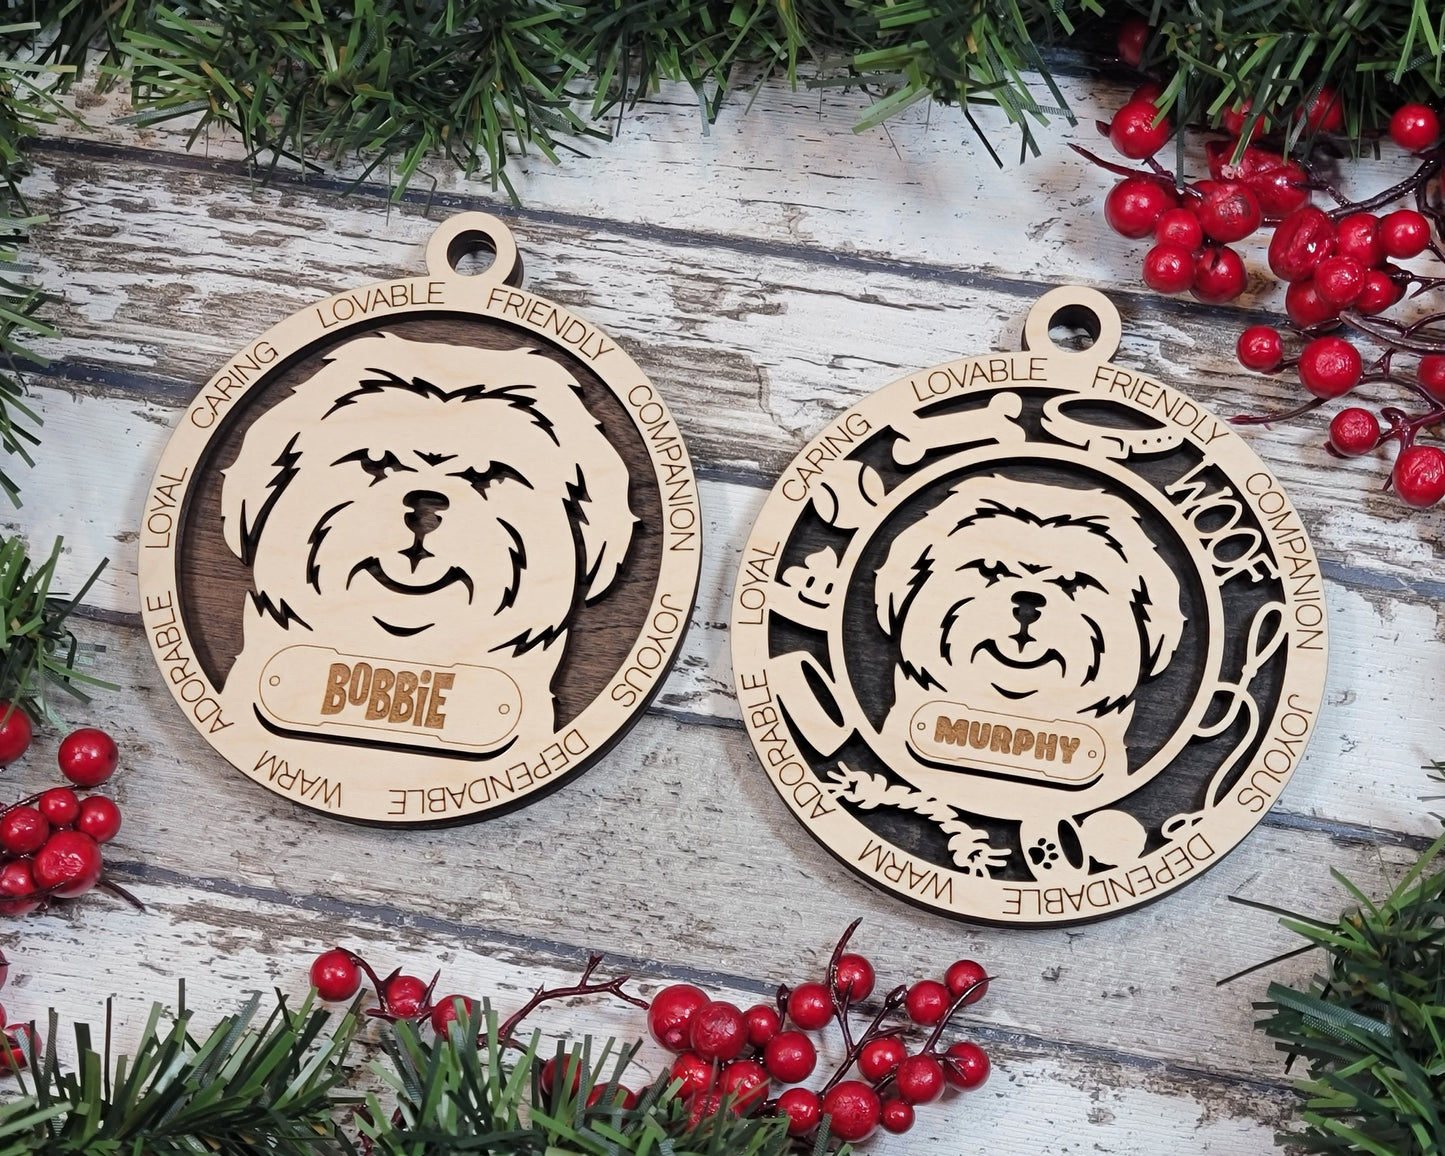 Shih Tzu - Adorable Dog Ornaments - 2 Ornaments included - SVG, PDF, AI File Download - Sized for Glowforge